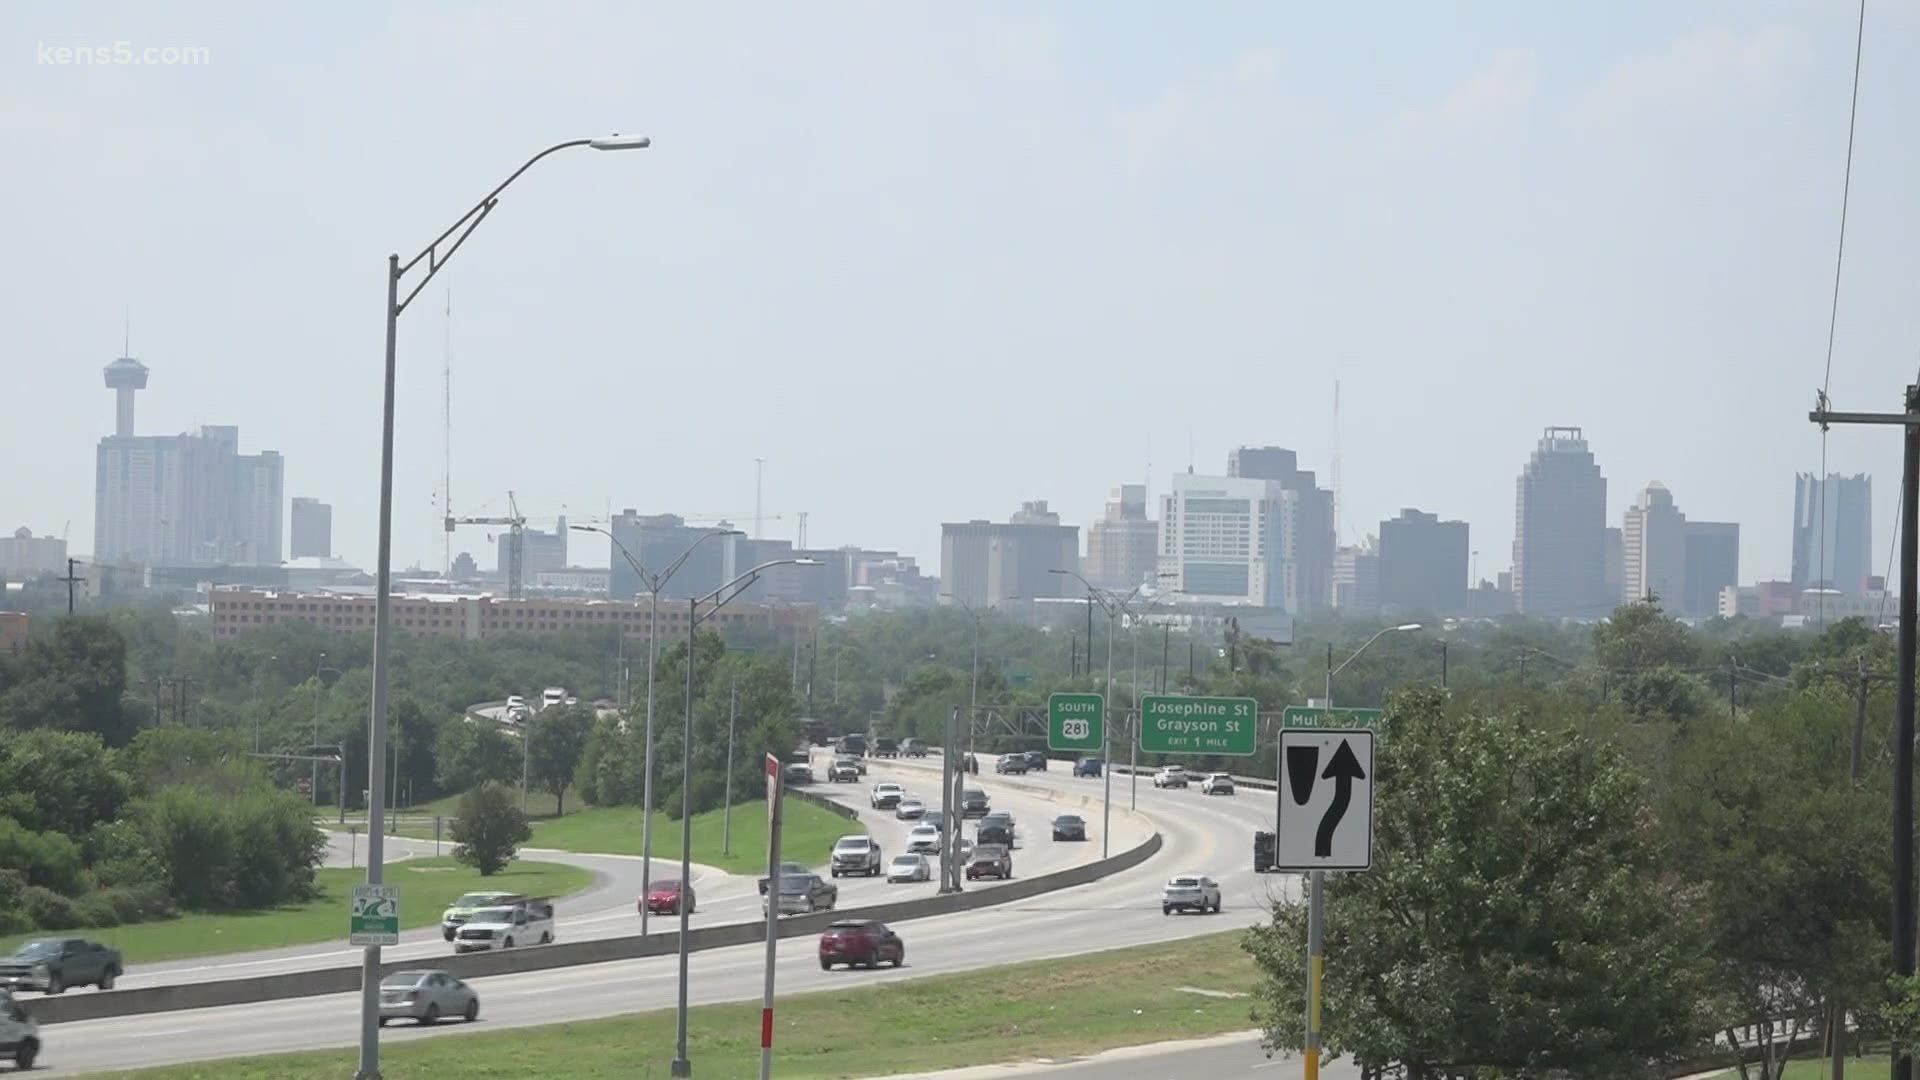 This comes after a general report was released last week on air pollution in San Antonio.